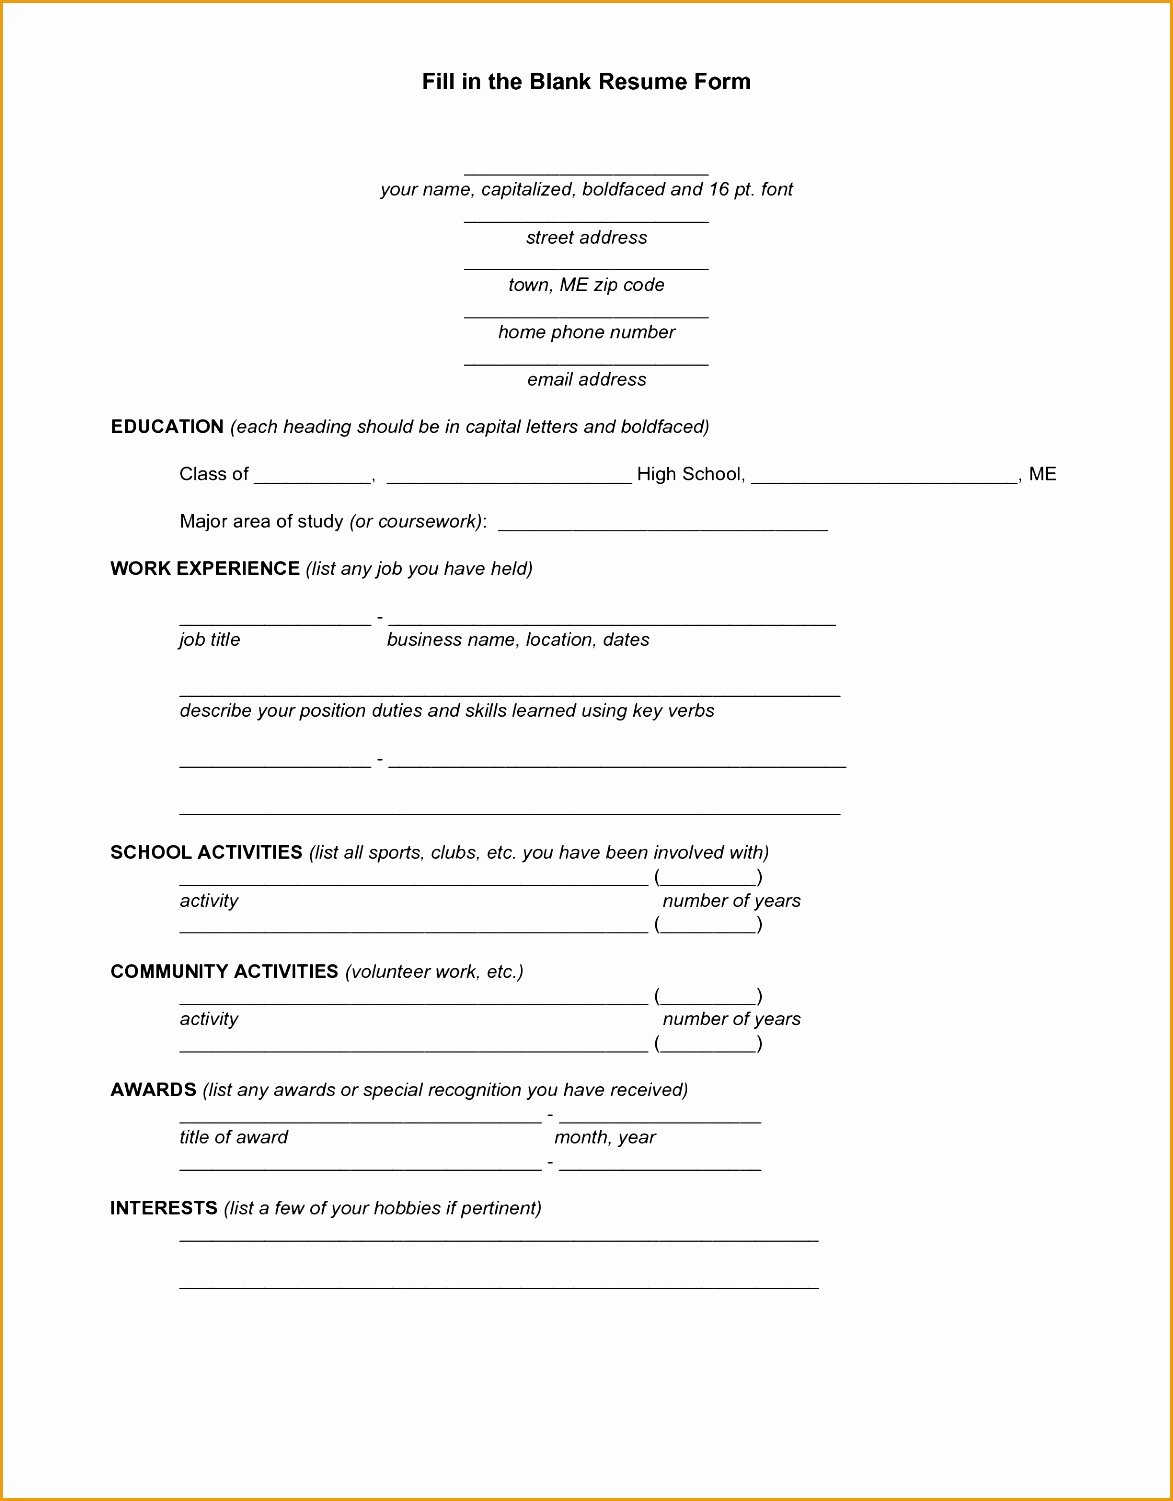 9 Blank Resume forms to Fill Out Free Samples Examples